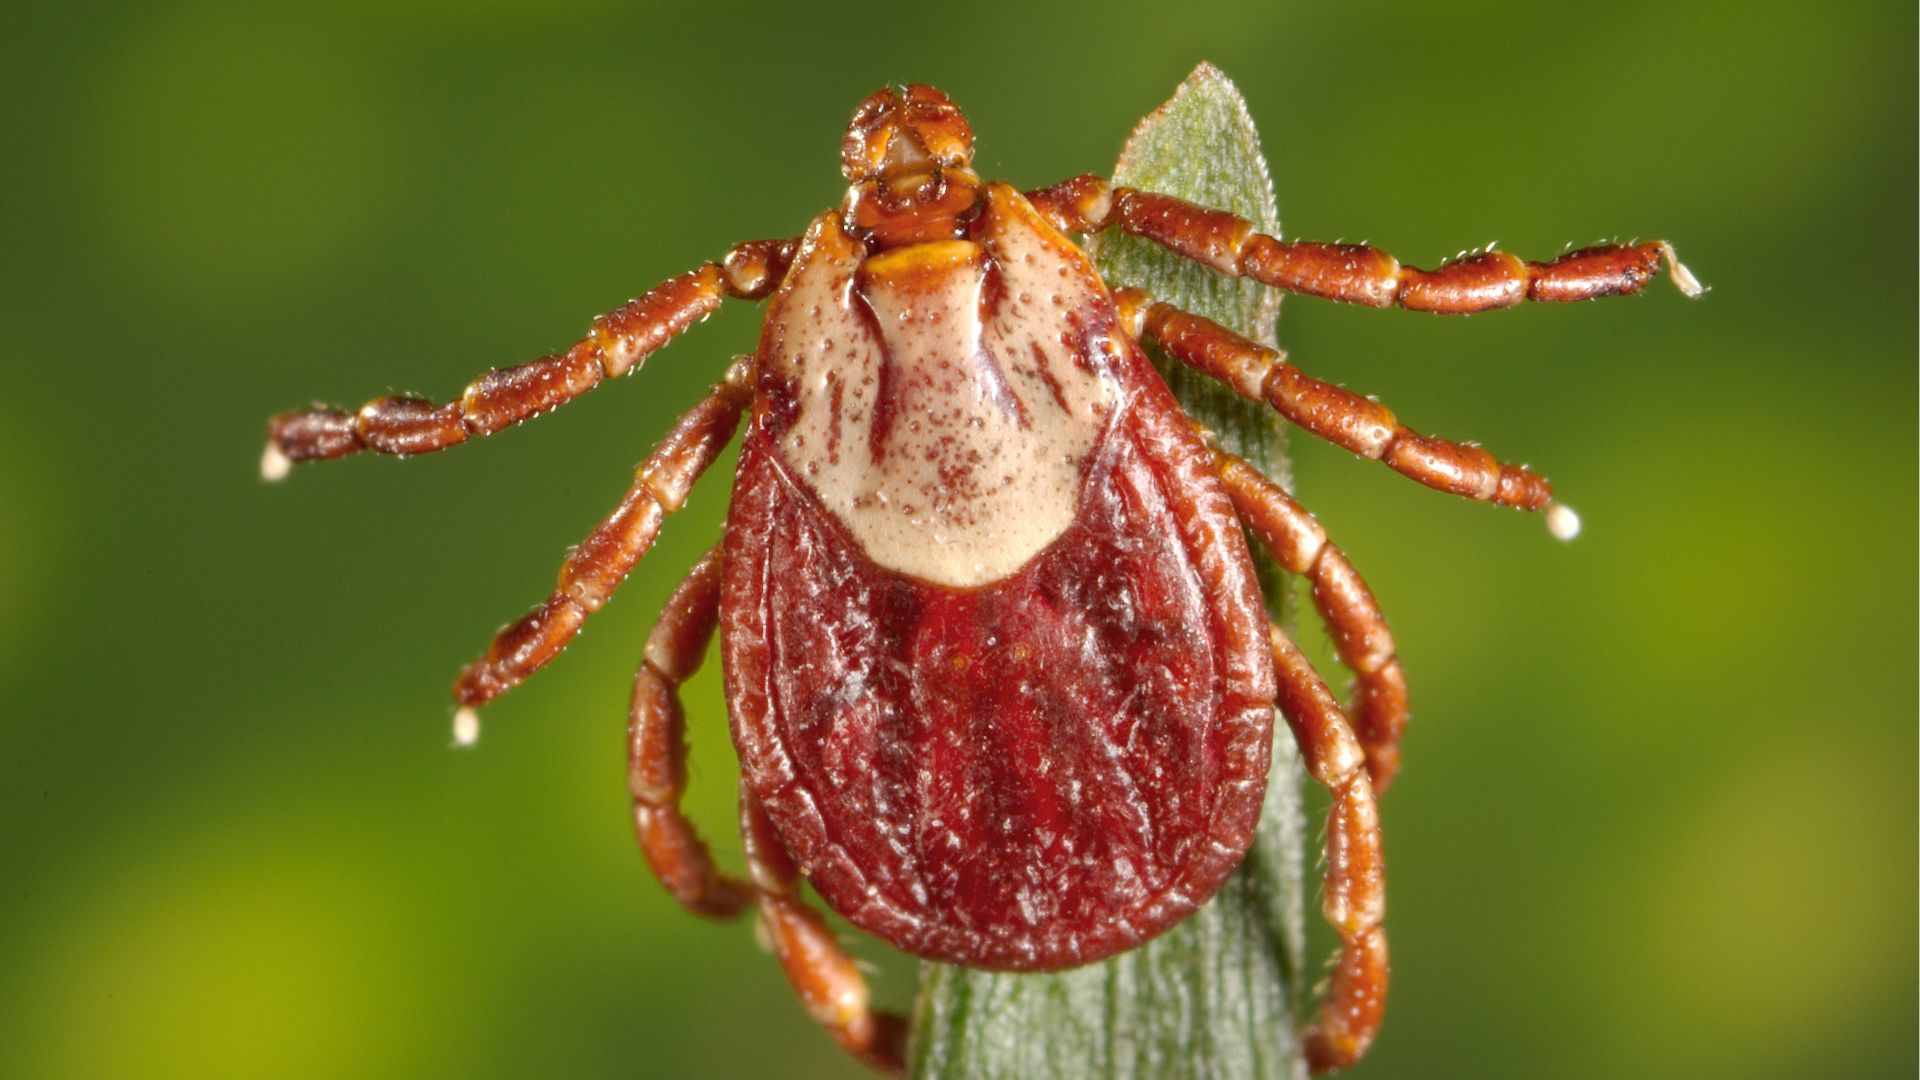 close up photo of a rocky mountain wood tick questing on a blade of grass